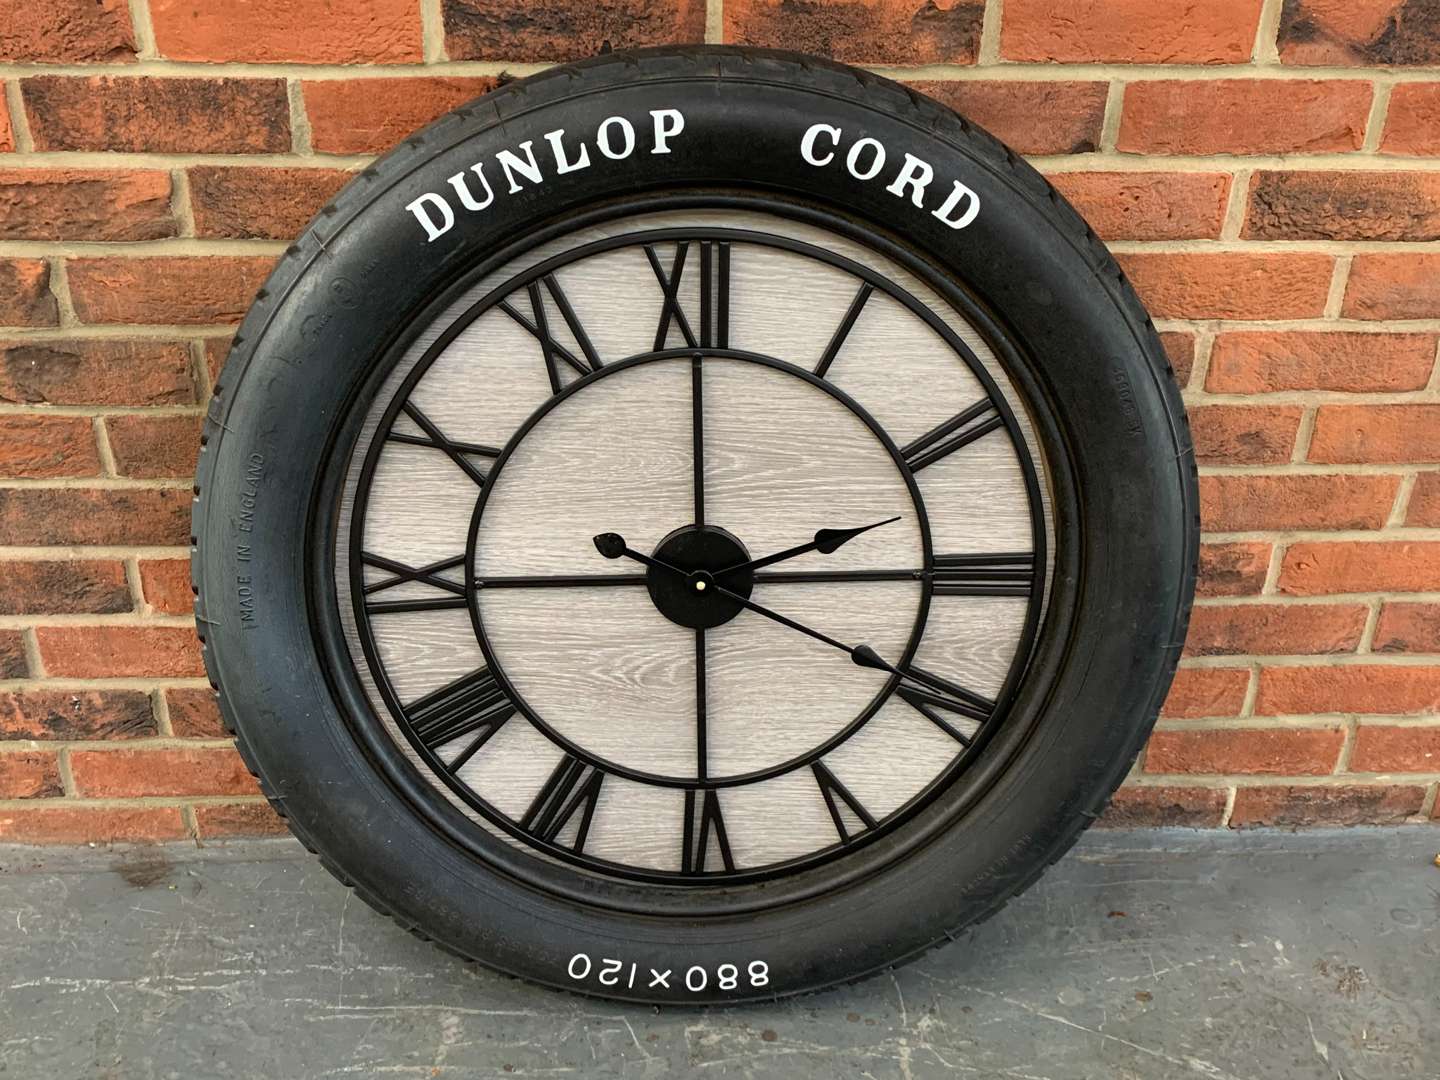 <p>1908 Renault Dunlop Tyre Clock (Direct From His Grace, The Duke Of Rutland)</p>